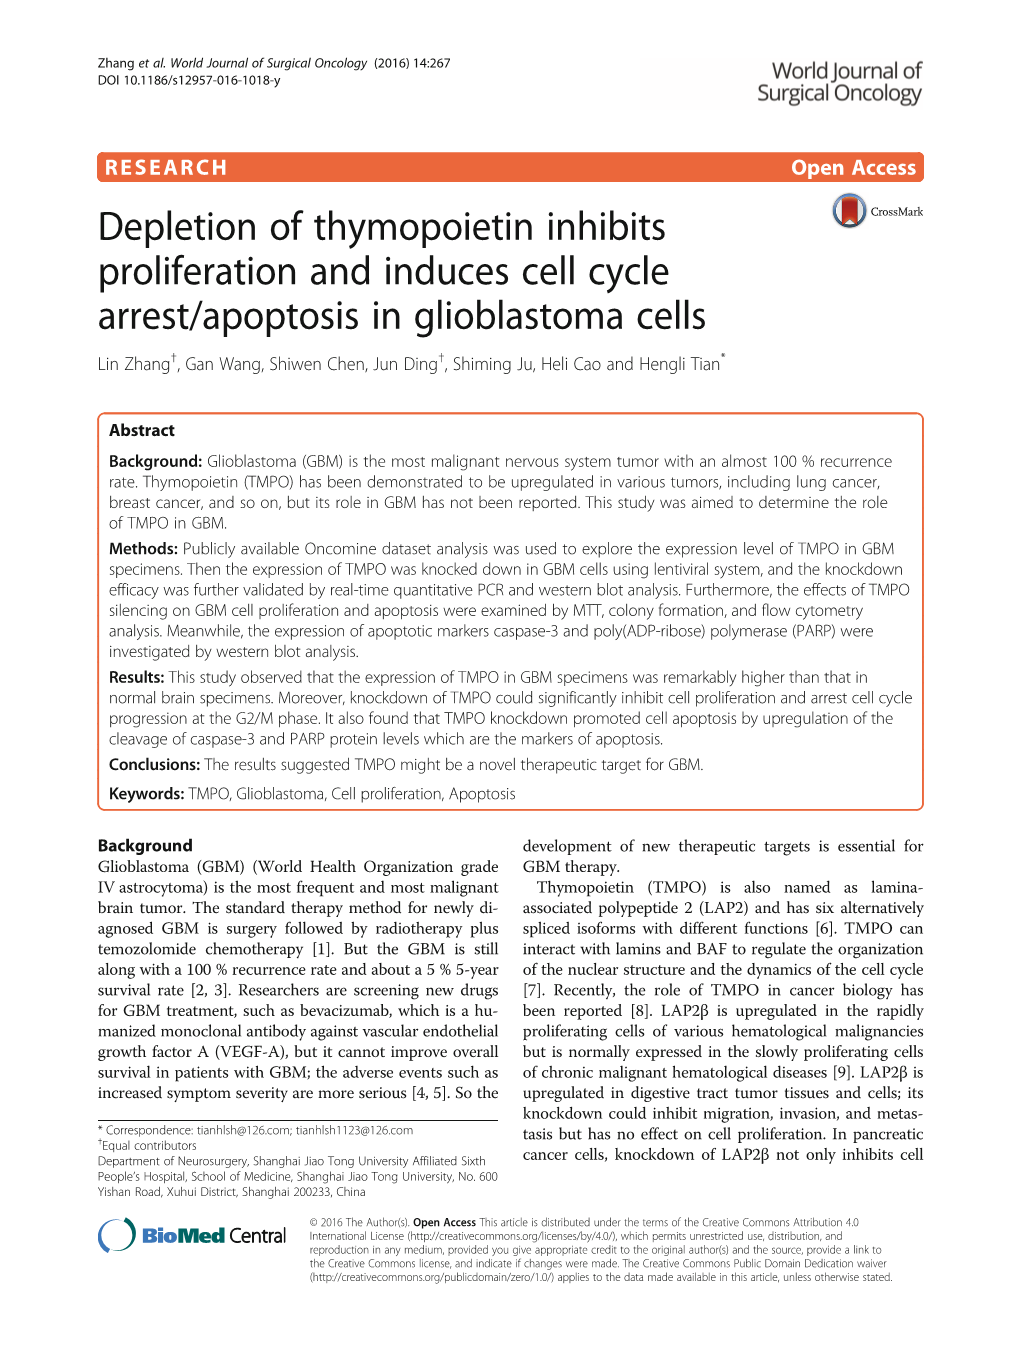 Depletion of Thymopoietin Inhibits Proliferation and Induces Cell Cycle